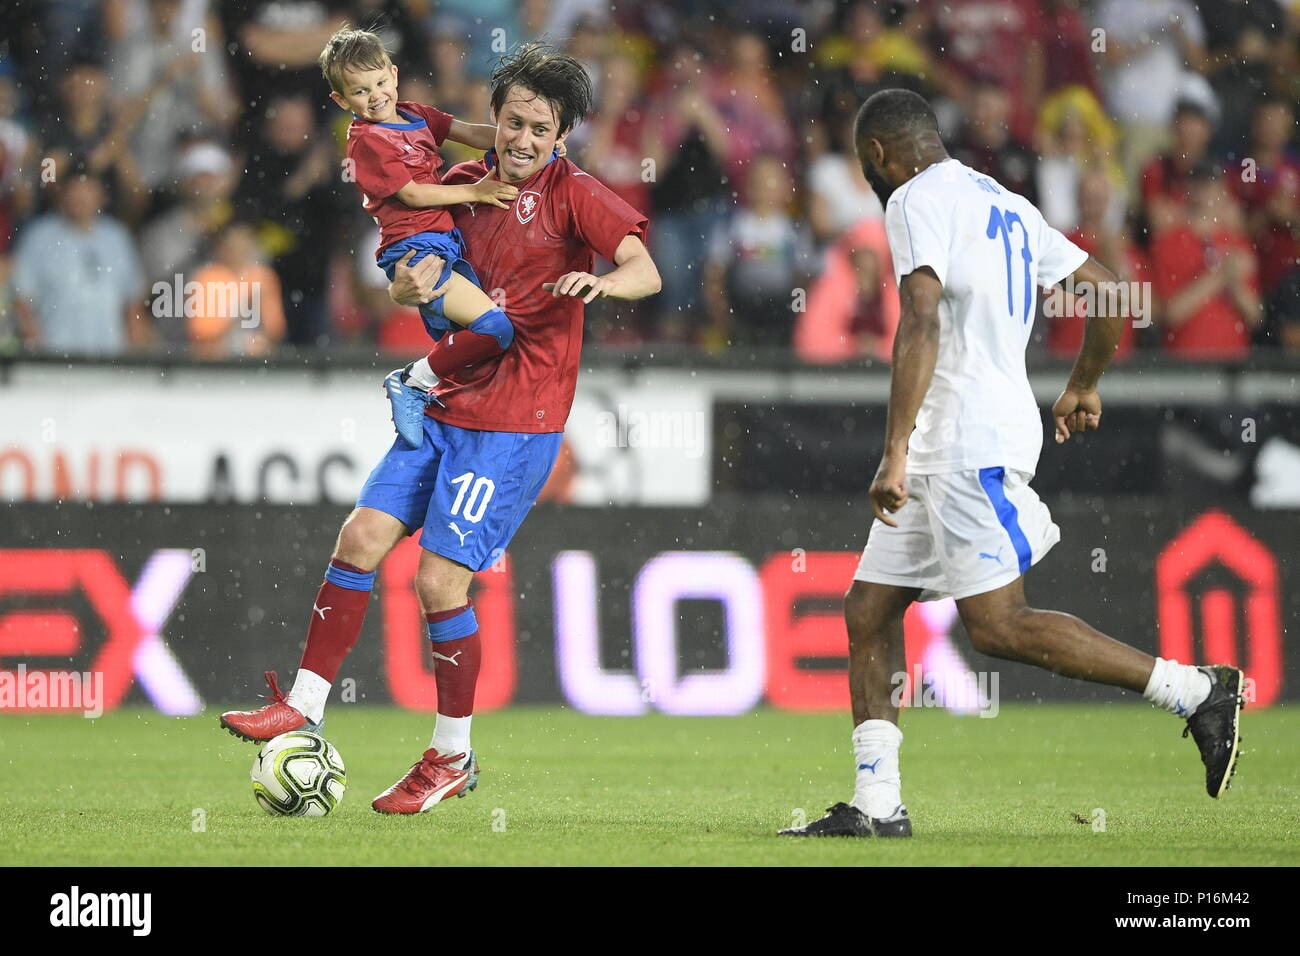 Tomas Rosicky and his son Tomas Rosicky Jr of Czech team and Alex Song of TR10 World Team in action during the match. Former captain of the Czech national football team Tomas Rosicky definitely ended his career at the age of 37 in a farewell match played despite a driving cloudburst which postponed its kickoff today, on Saturday, June 9, 2018. The Czech team, in which he played, defeated the 'team of the world,' composed of his former fellow players from Borussia Dortmund and Arsenal London, 5-2. The final goal was scored by Rosicky's four-year-old son Tomas. Weather complicated the farewell m Stock Photo